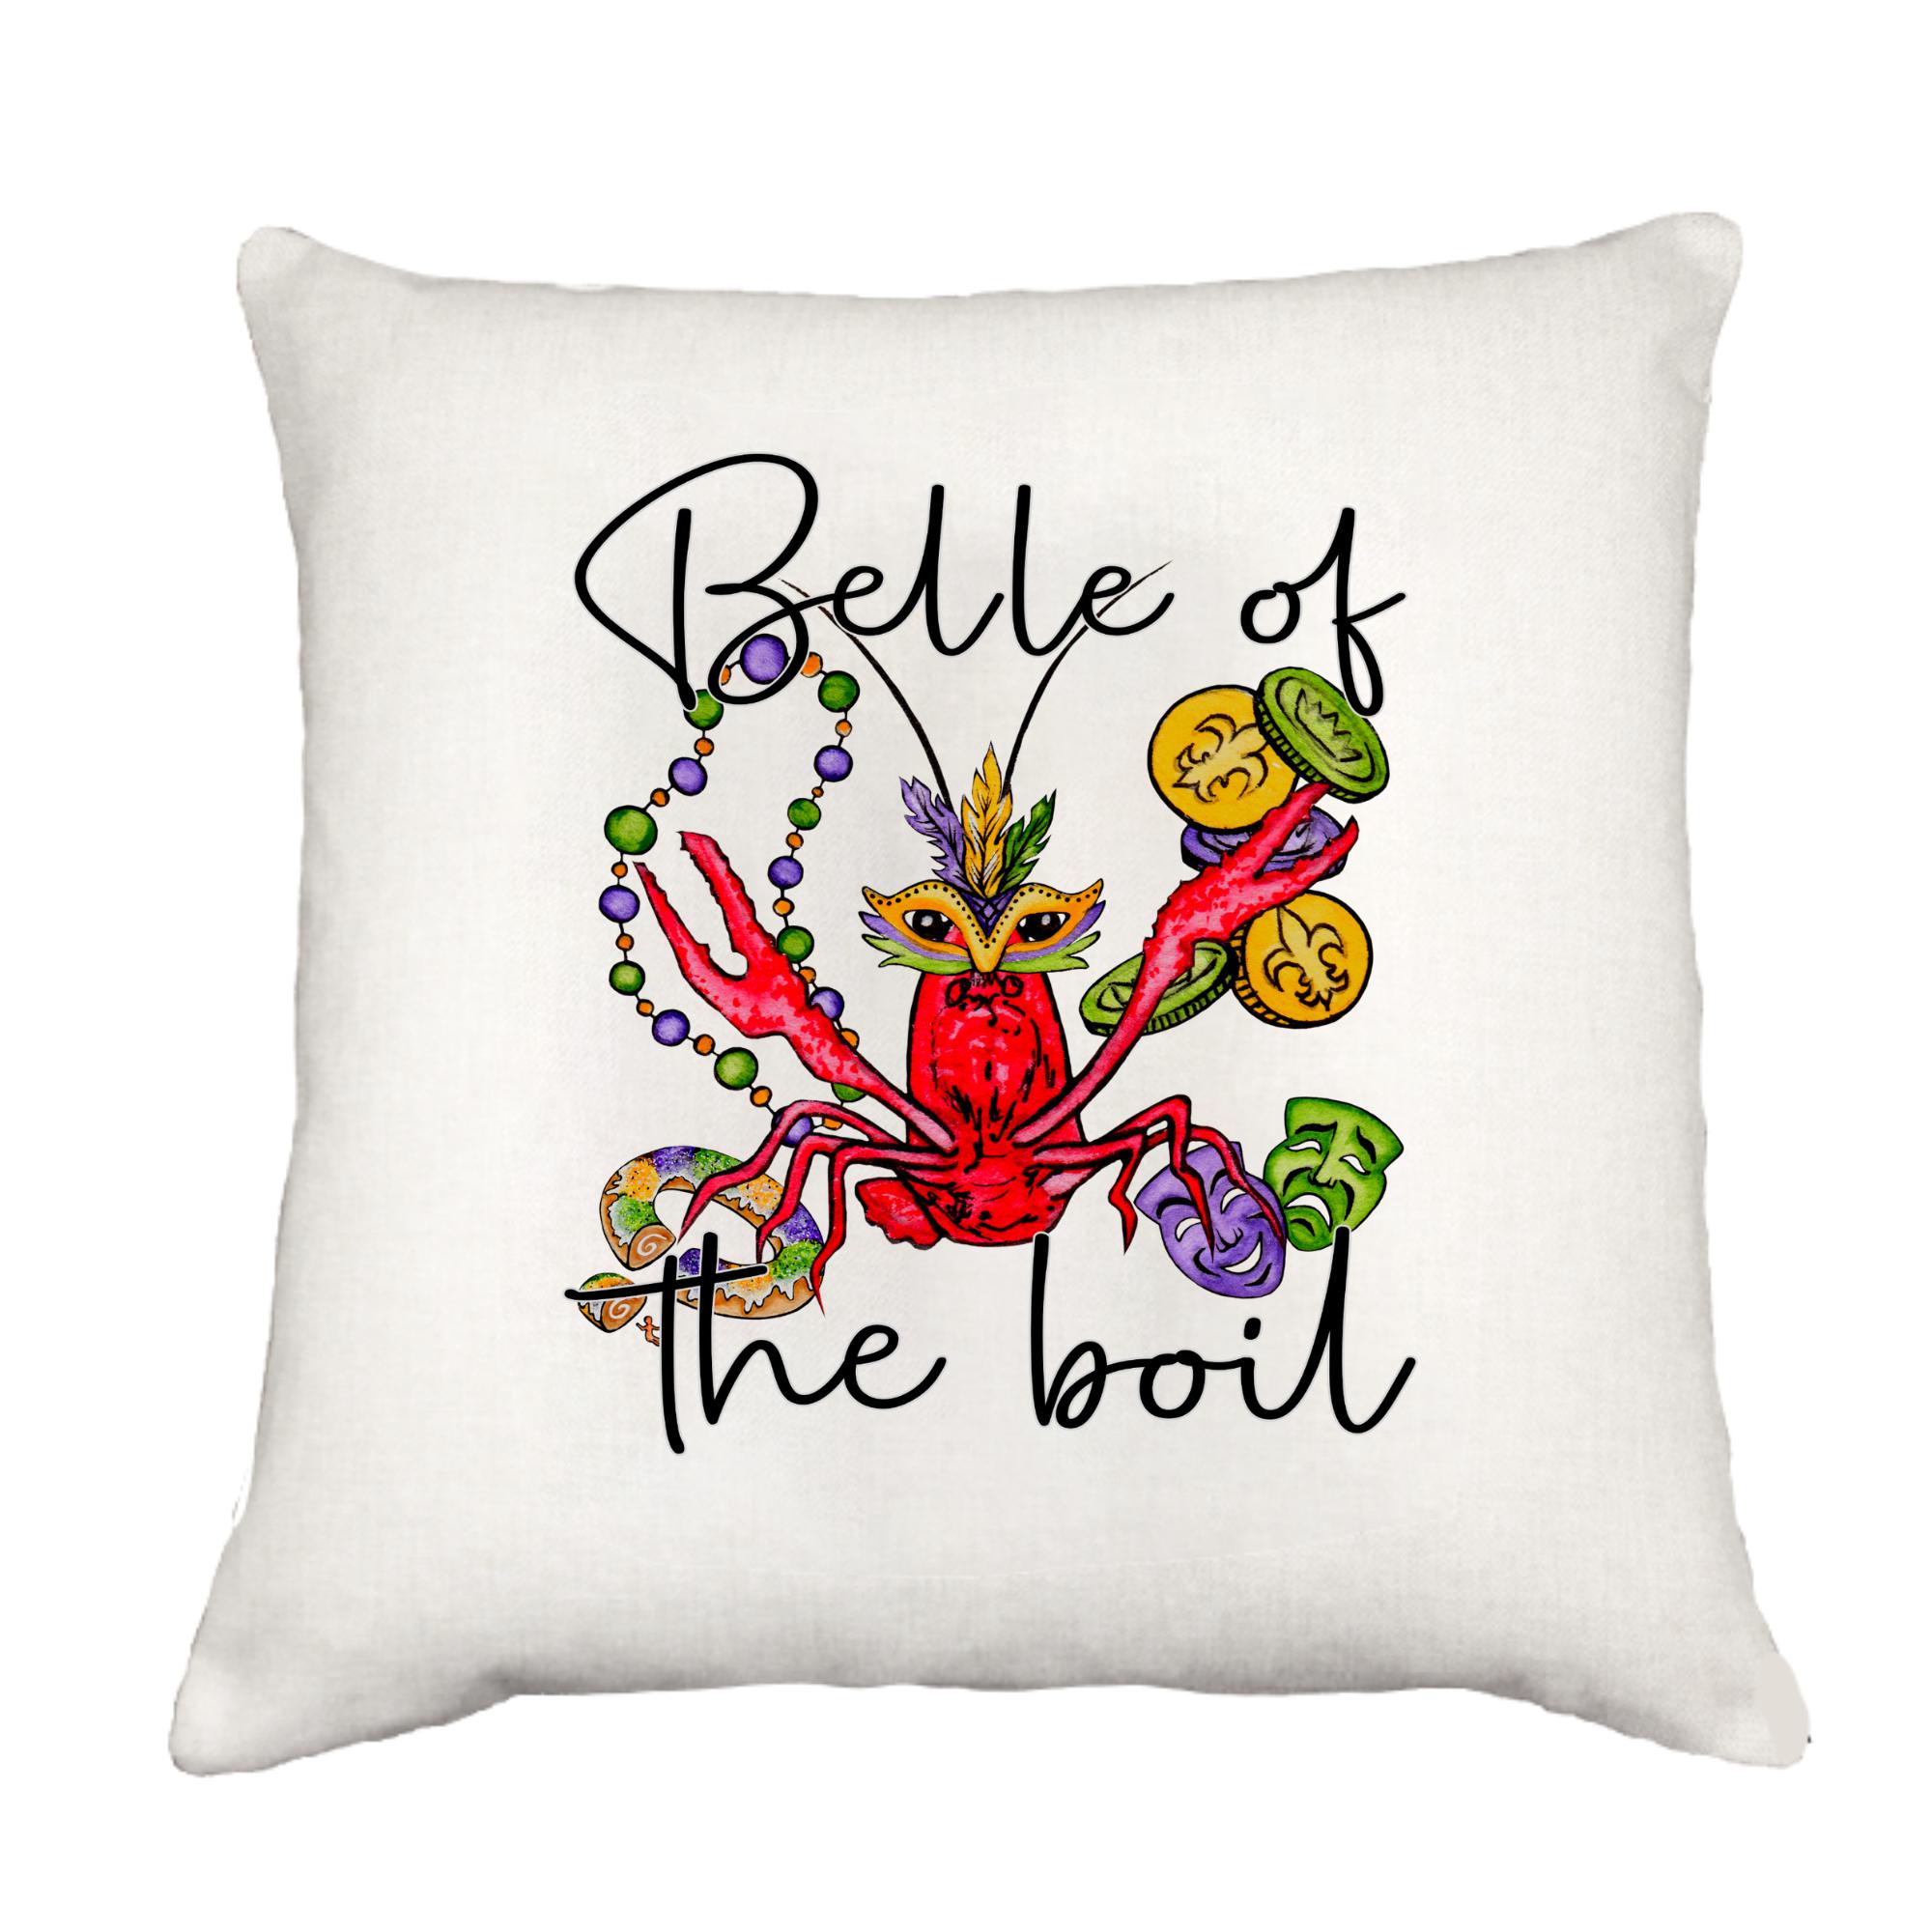 Belle Of The Boil Cottage Pillow Throw/Decorative Pillow - Southern Sisters